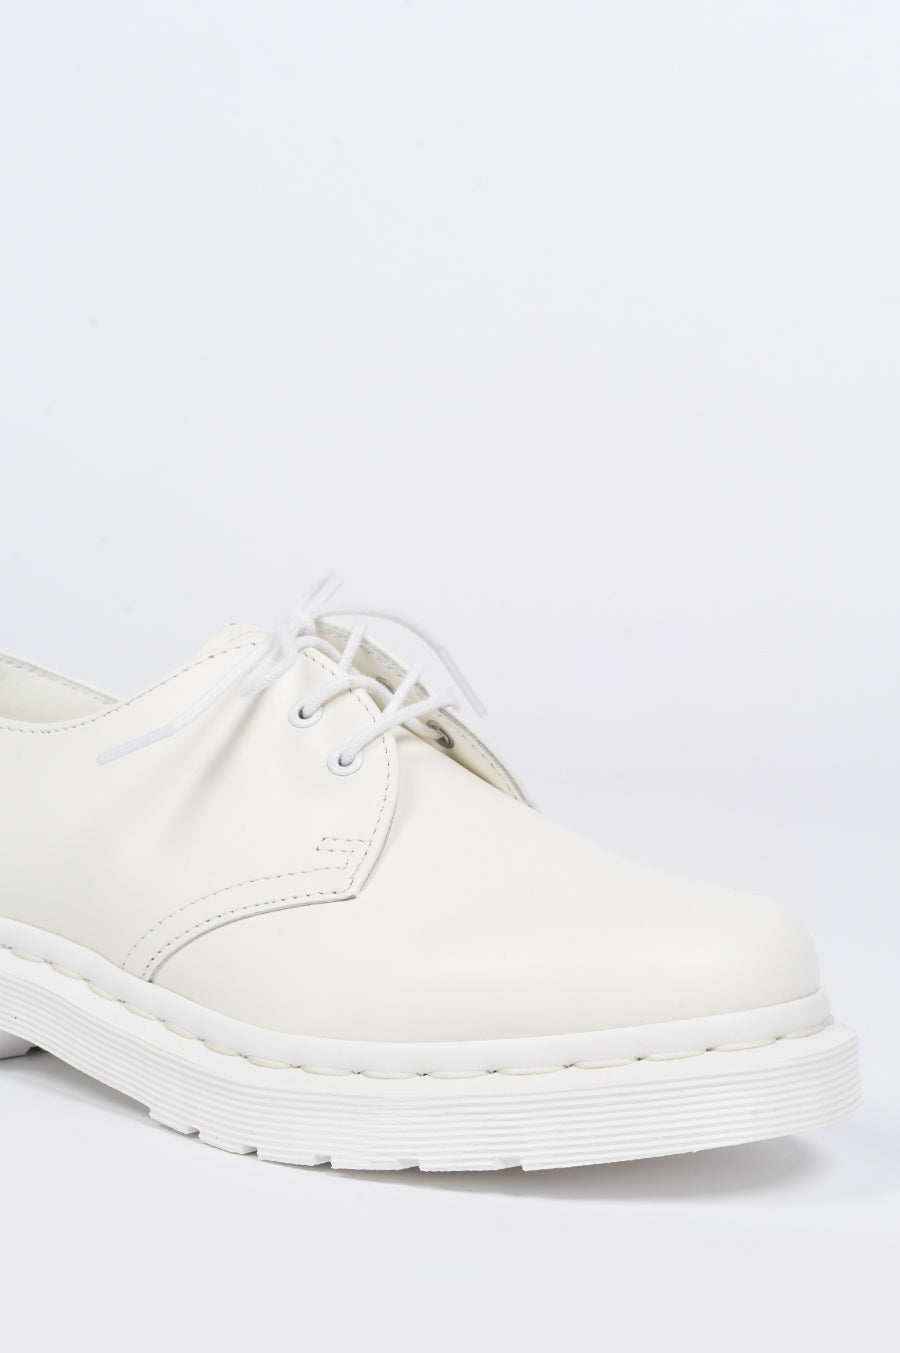 DR MARTENS 1461 MONO WHITE SMOOTH - BLENDS